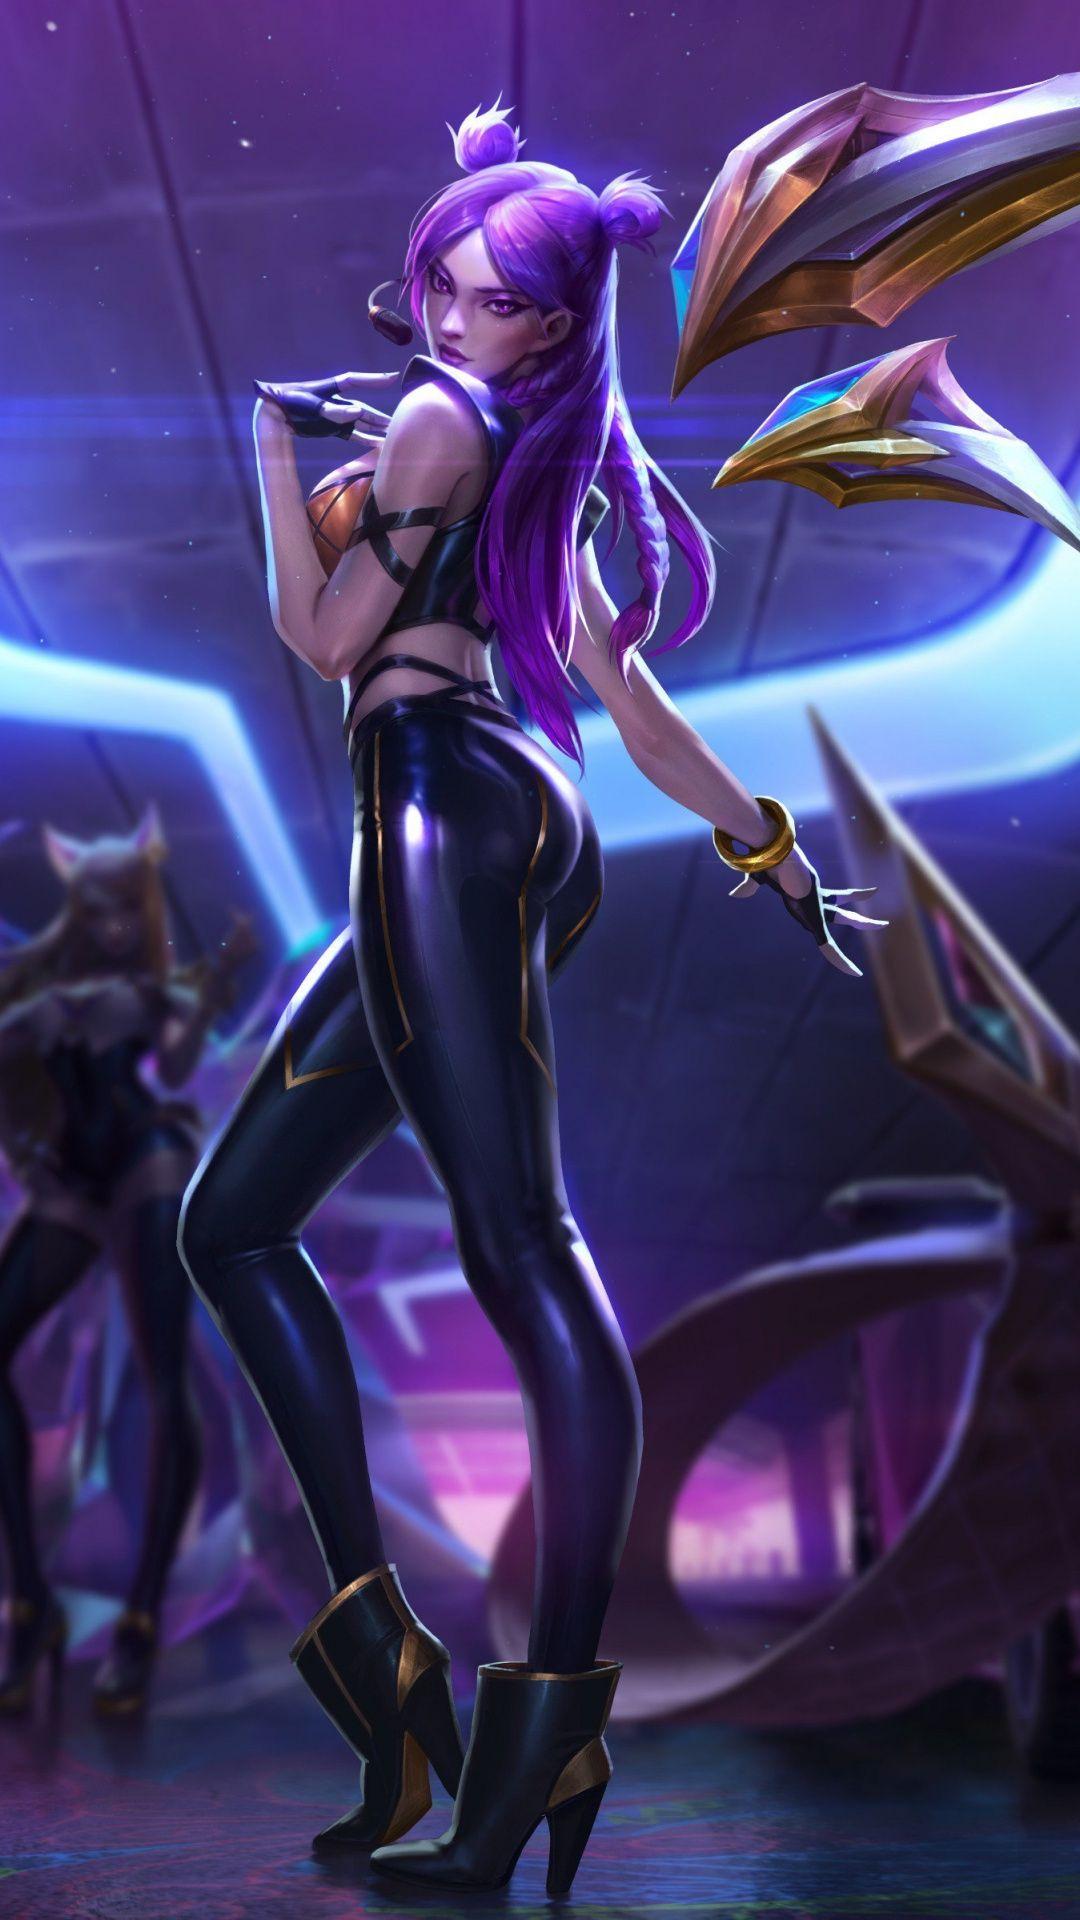 Wallpaper ID 302748  Video Game League Of Legends Phone Wallpaper KaiSa  League Of Legends 1440x3200 free download